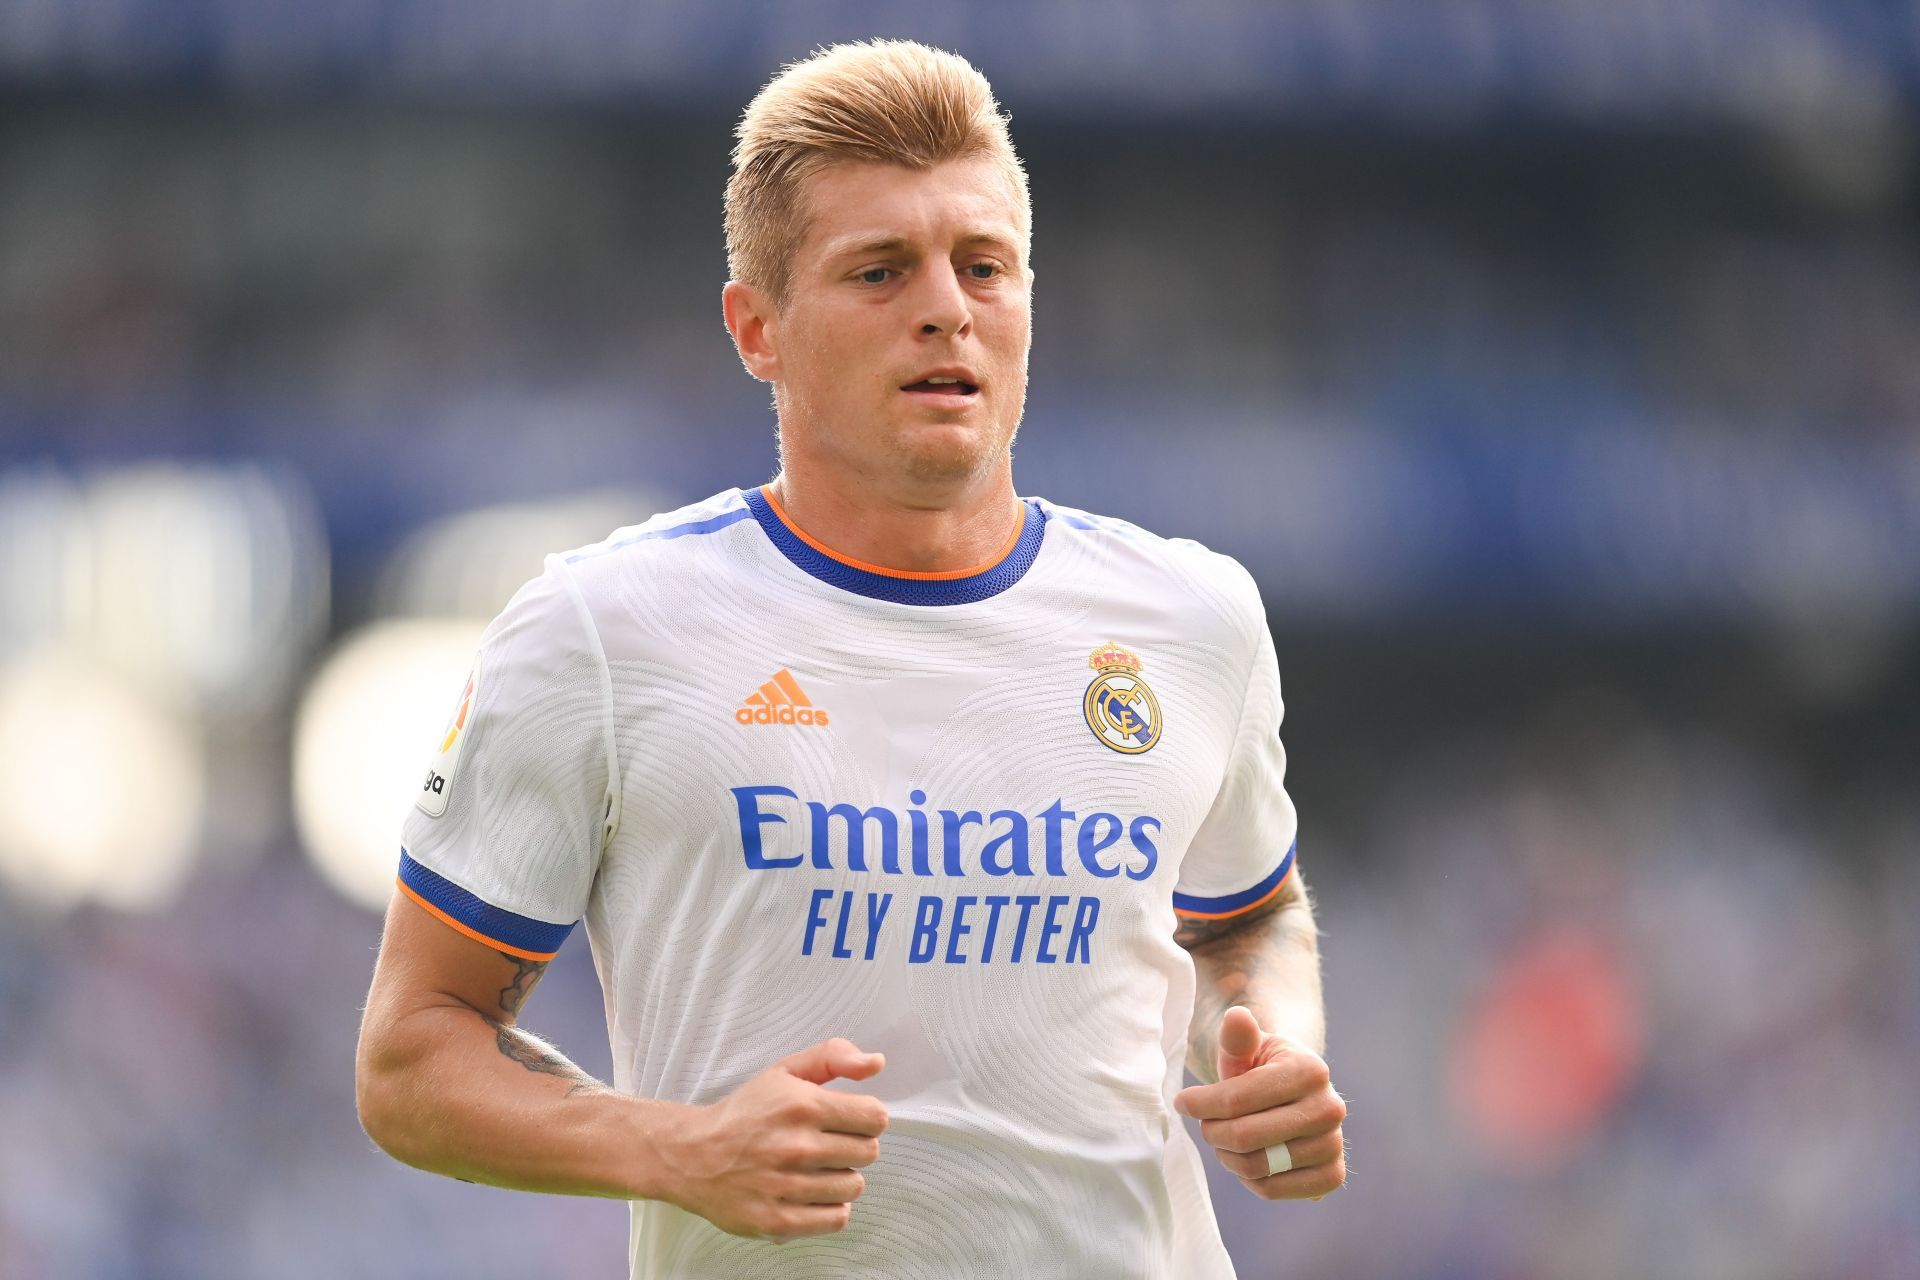 Toni Kroos is contemplating a move to Manchester City in January.